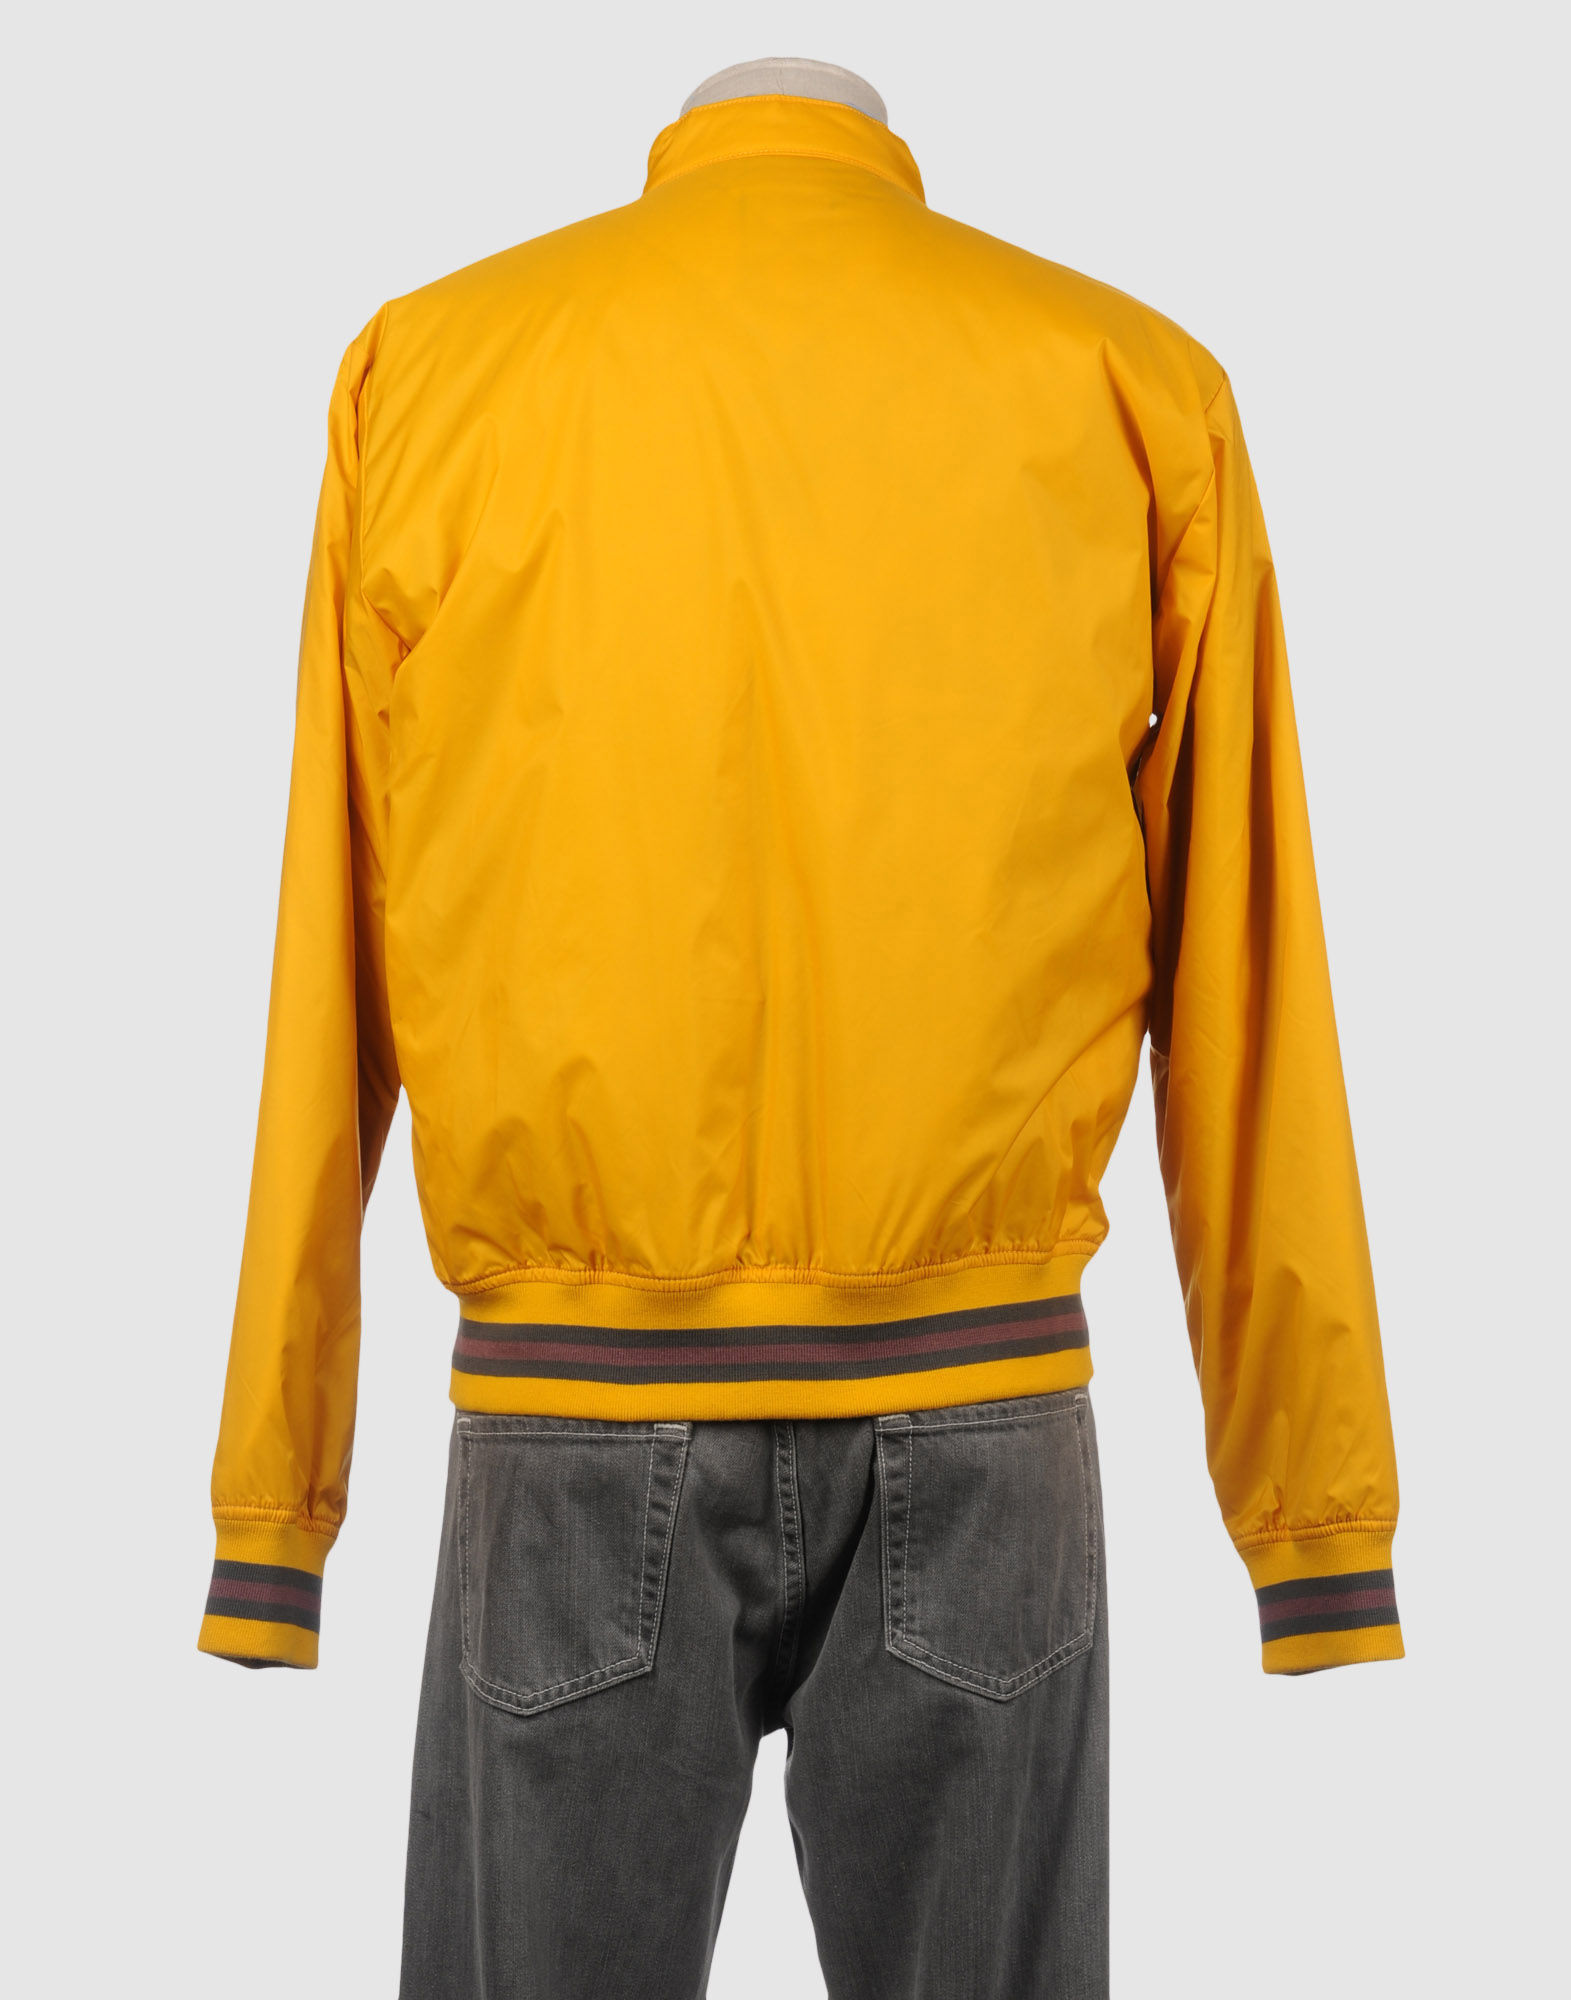 55dsl Synthetic Jacket in Yellow for Men - Lyst